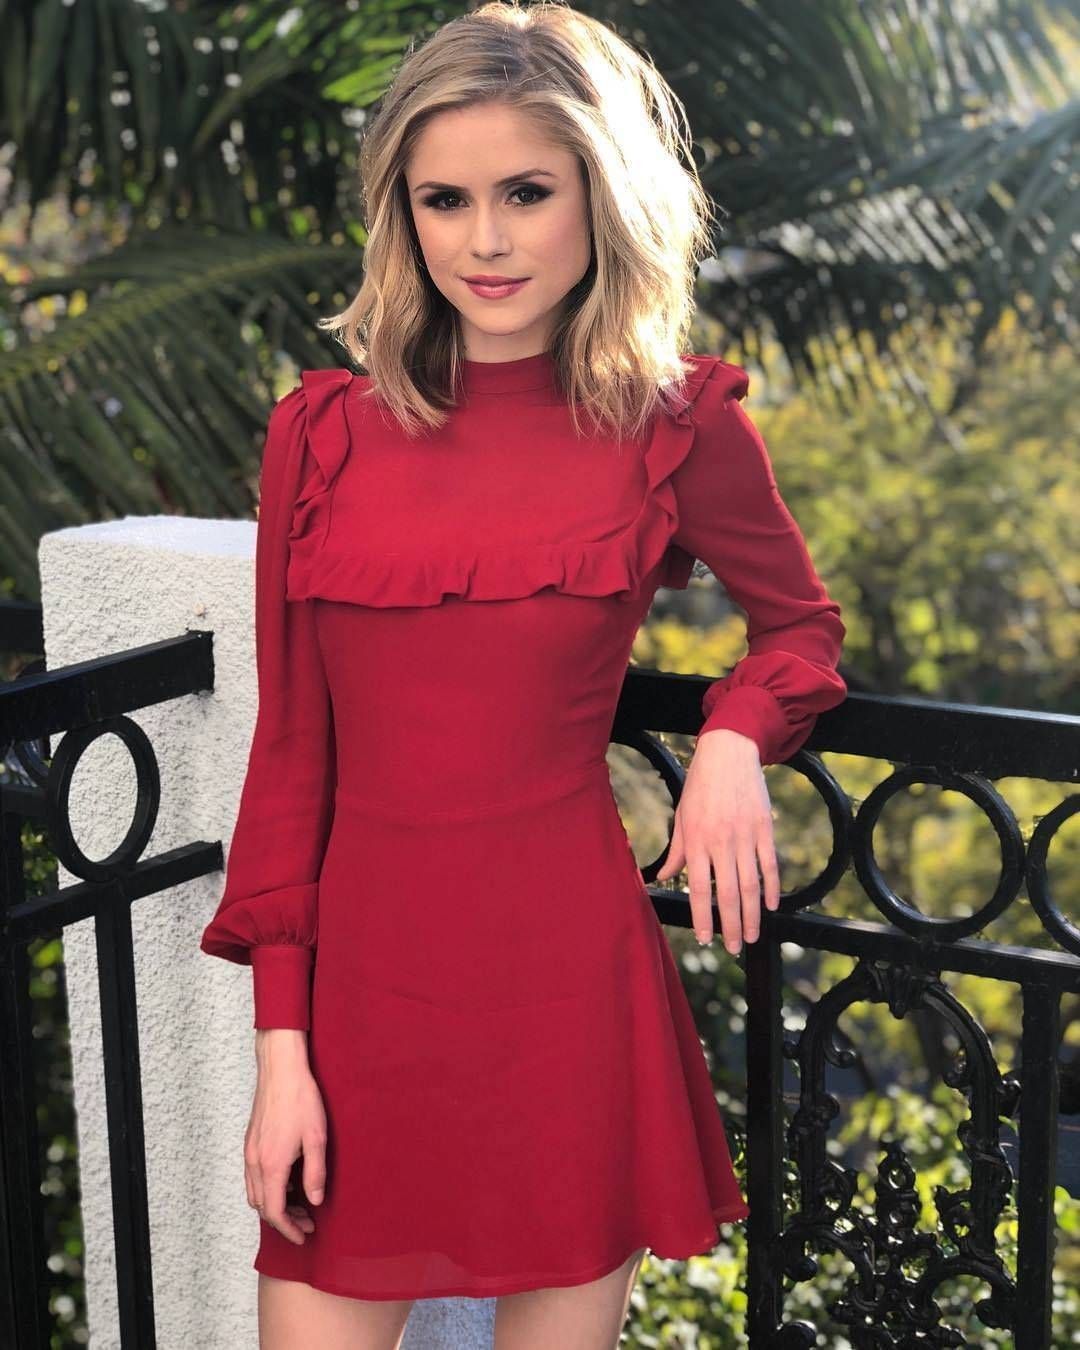 Erin Moriarty 2019 Wallpapers